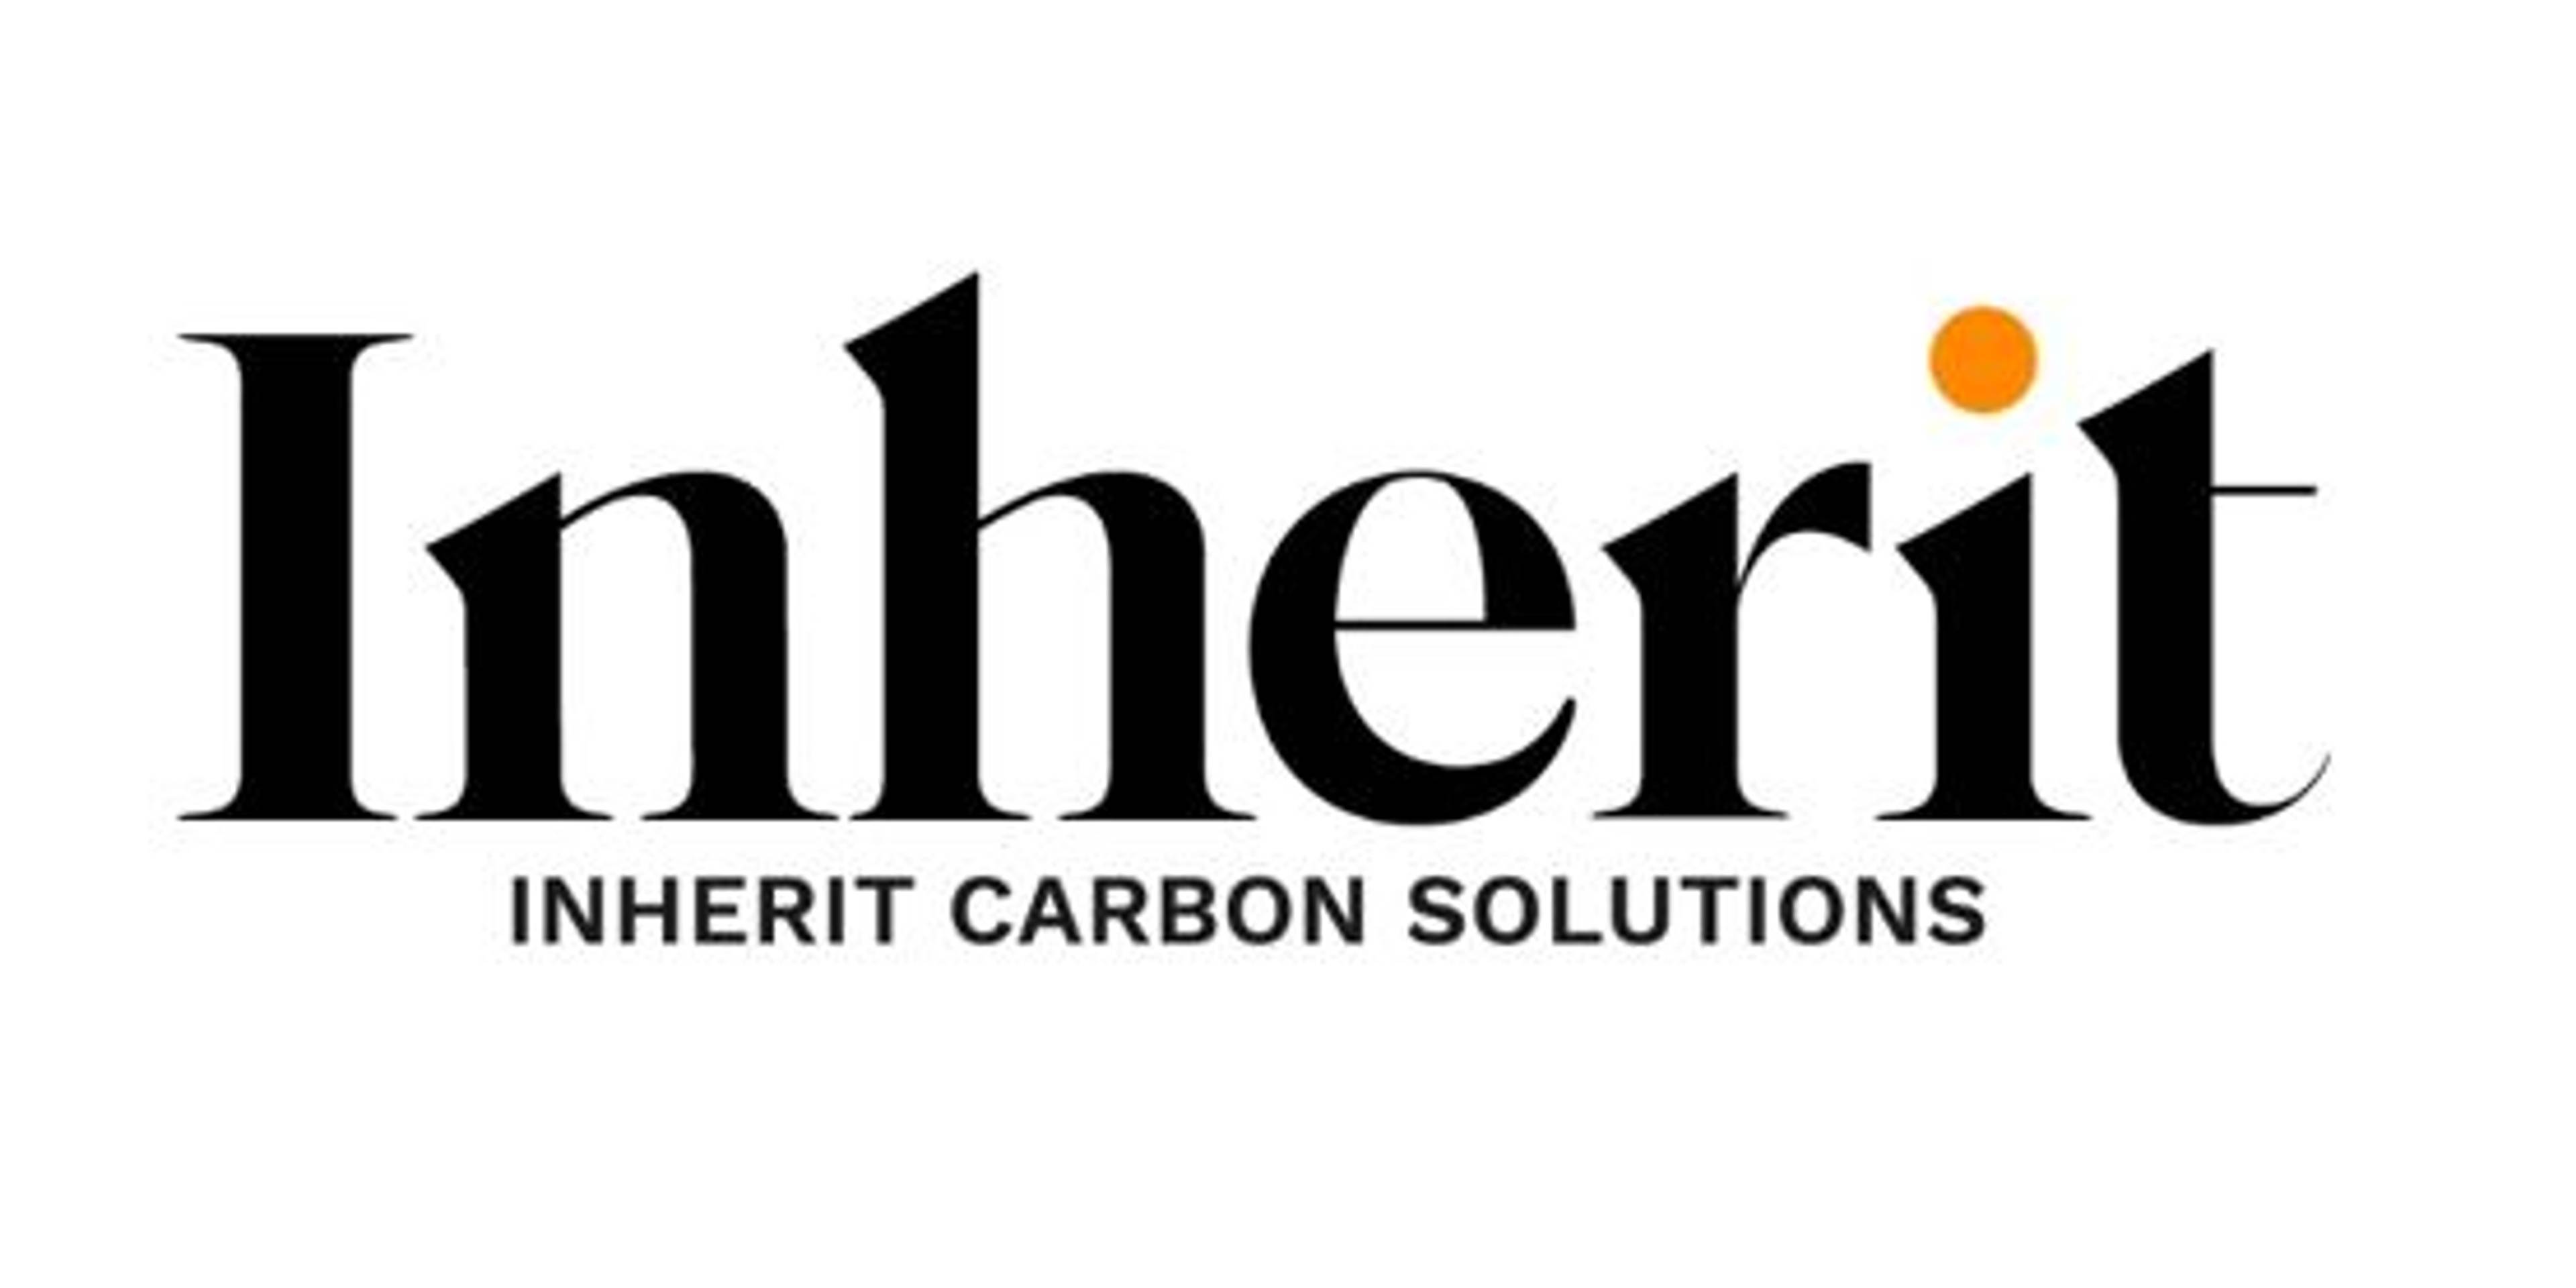 Equinor Ventures invests in Inherit Carbon Solutions AS Equinor